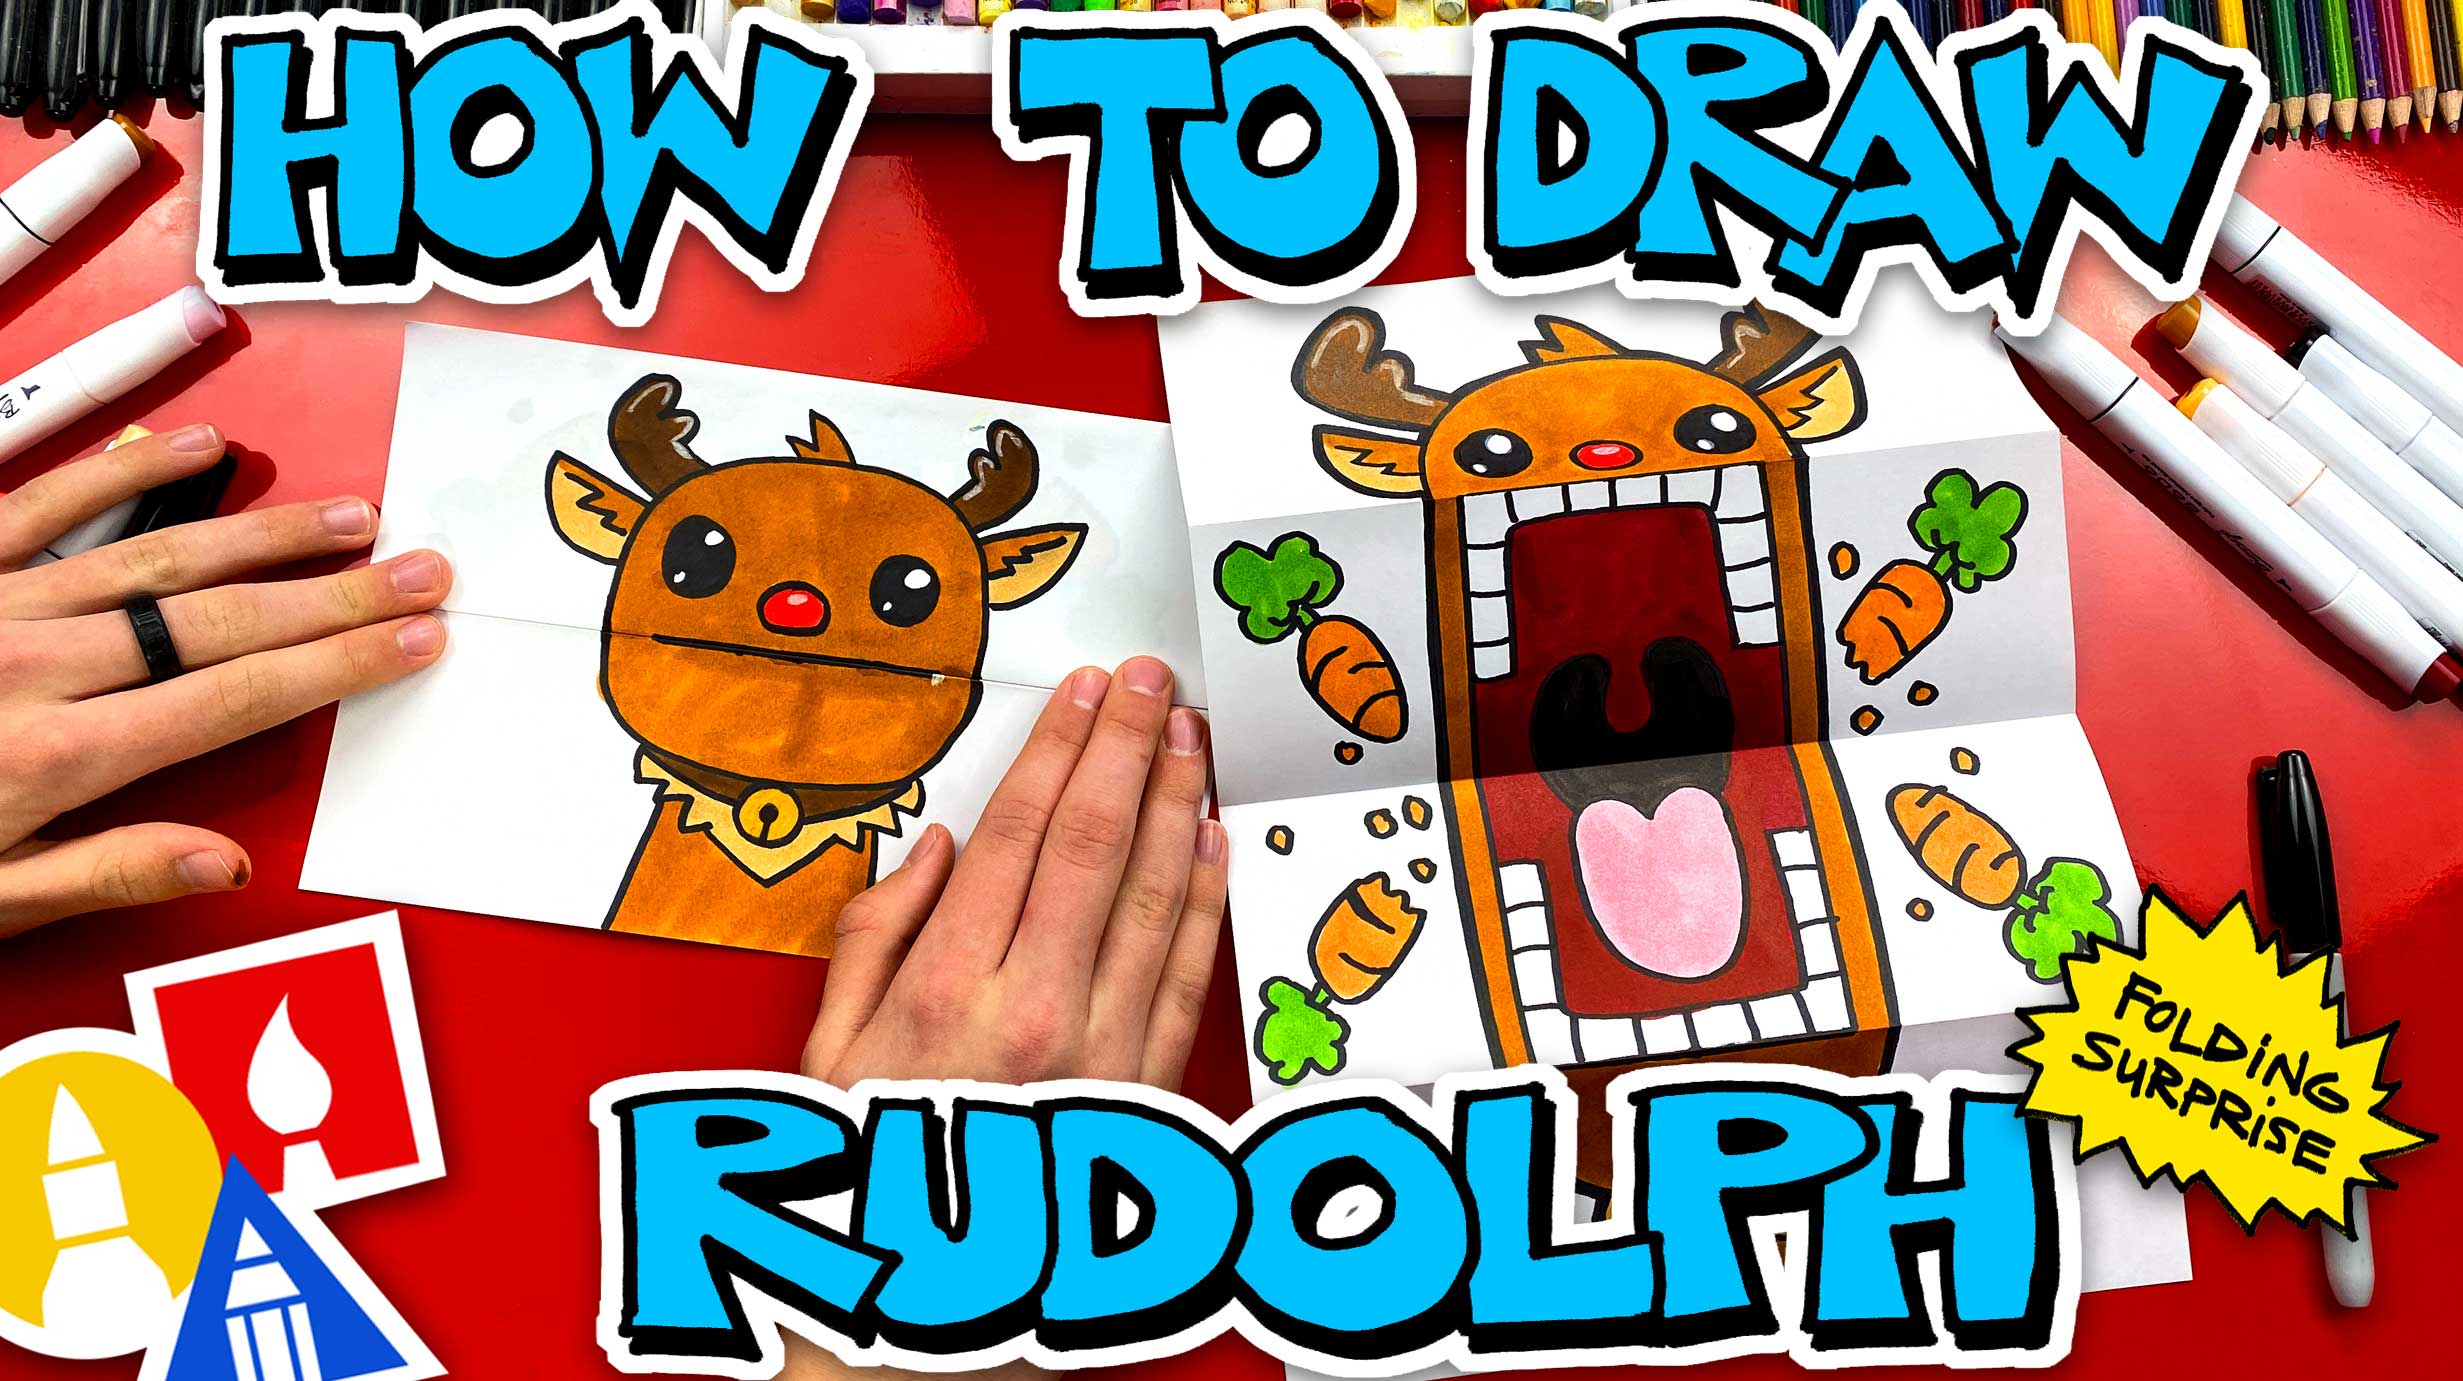 How To Draw A Rudolph Puppet Folding Surprise Art For Kids Hub